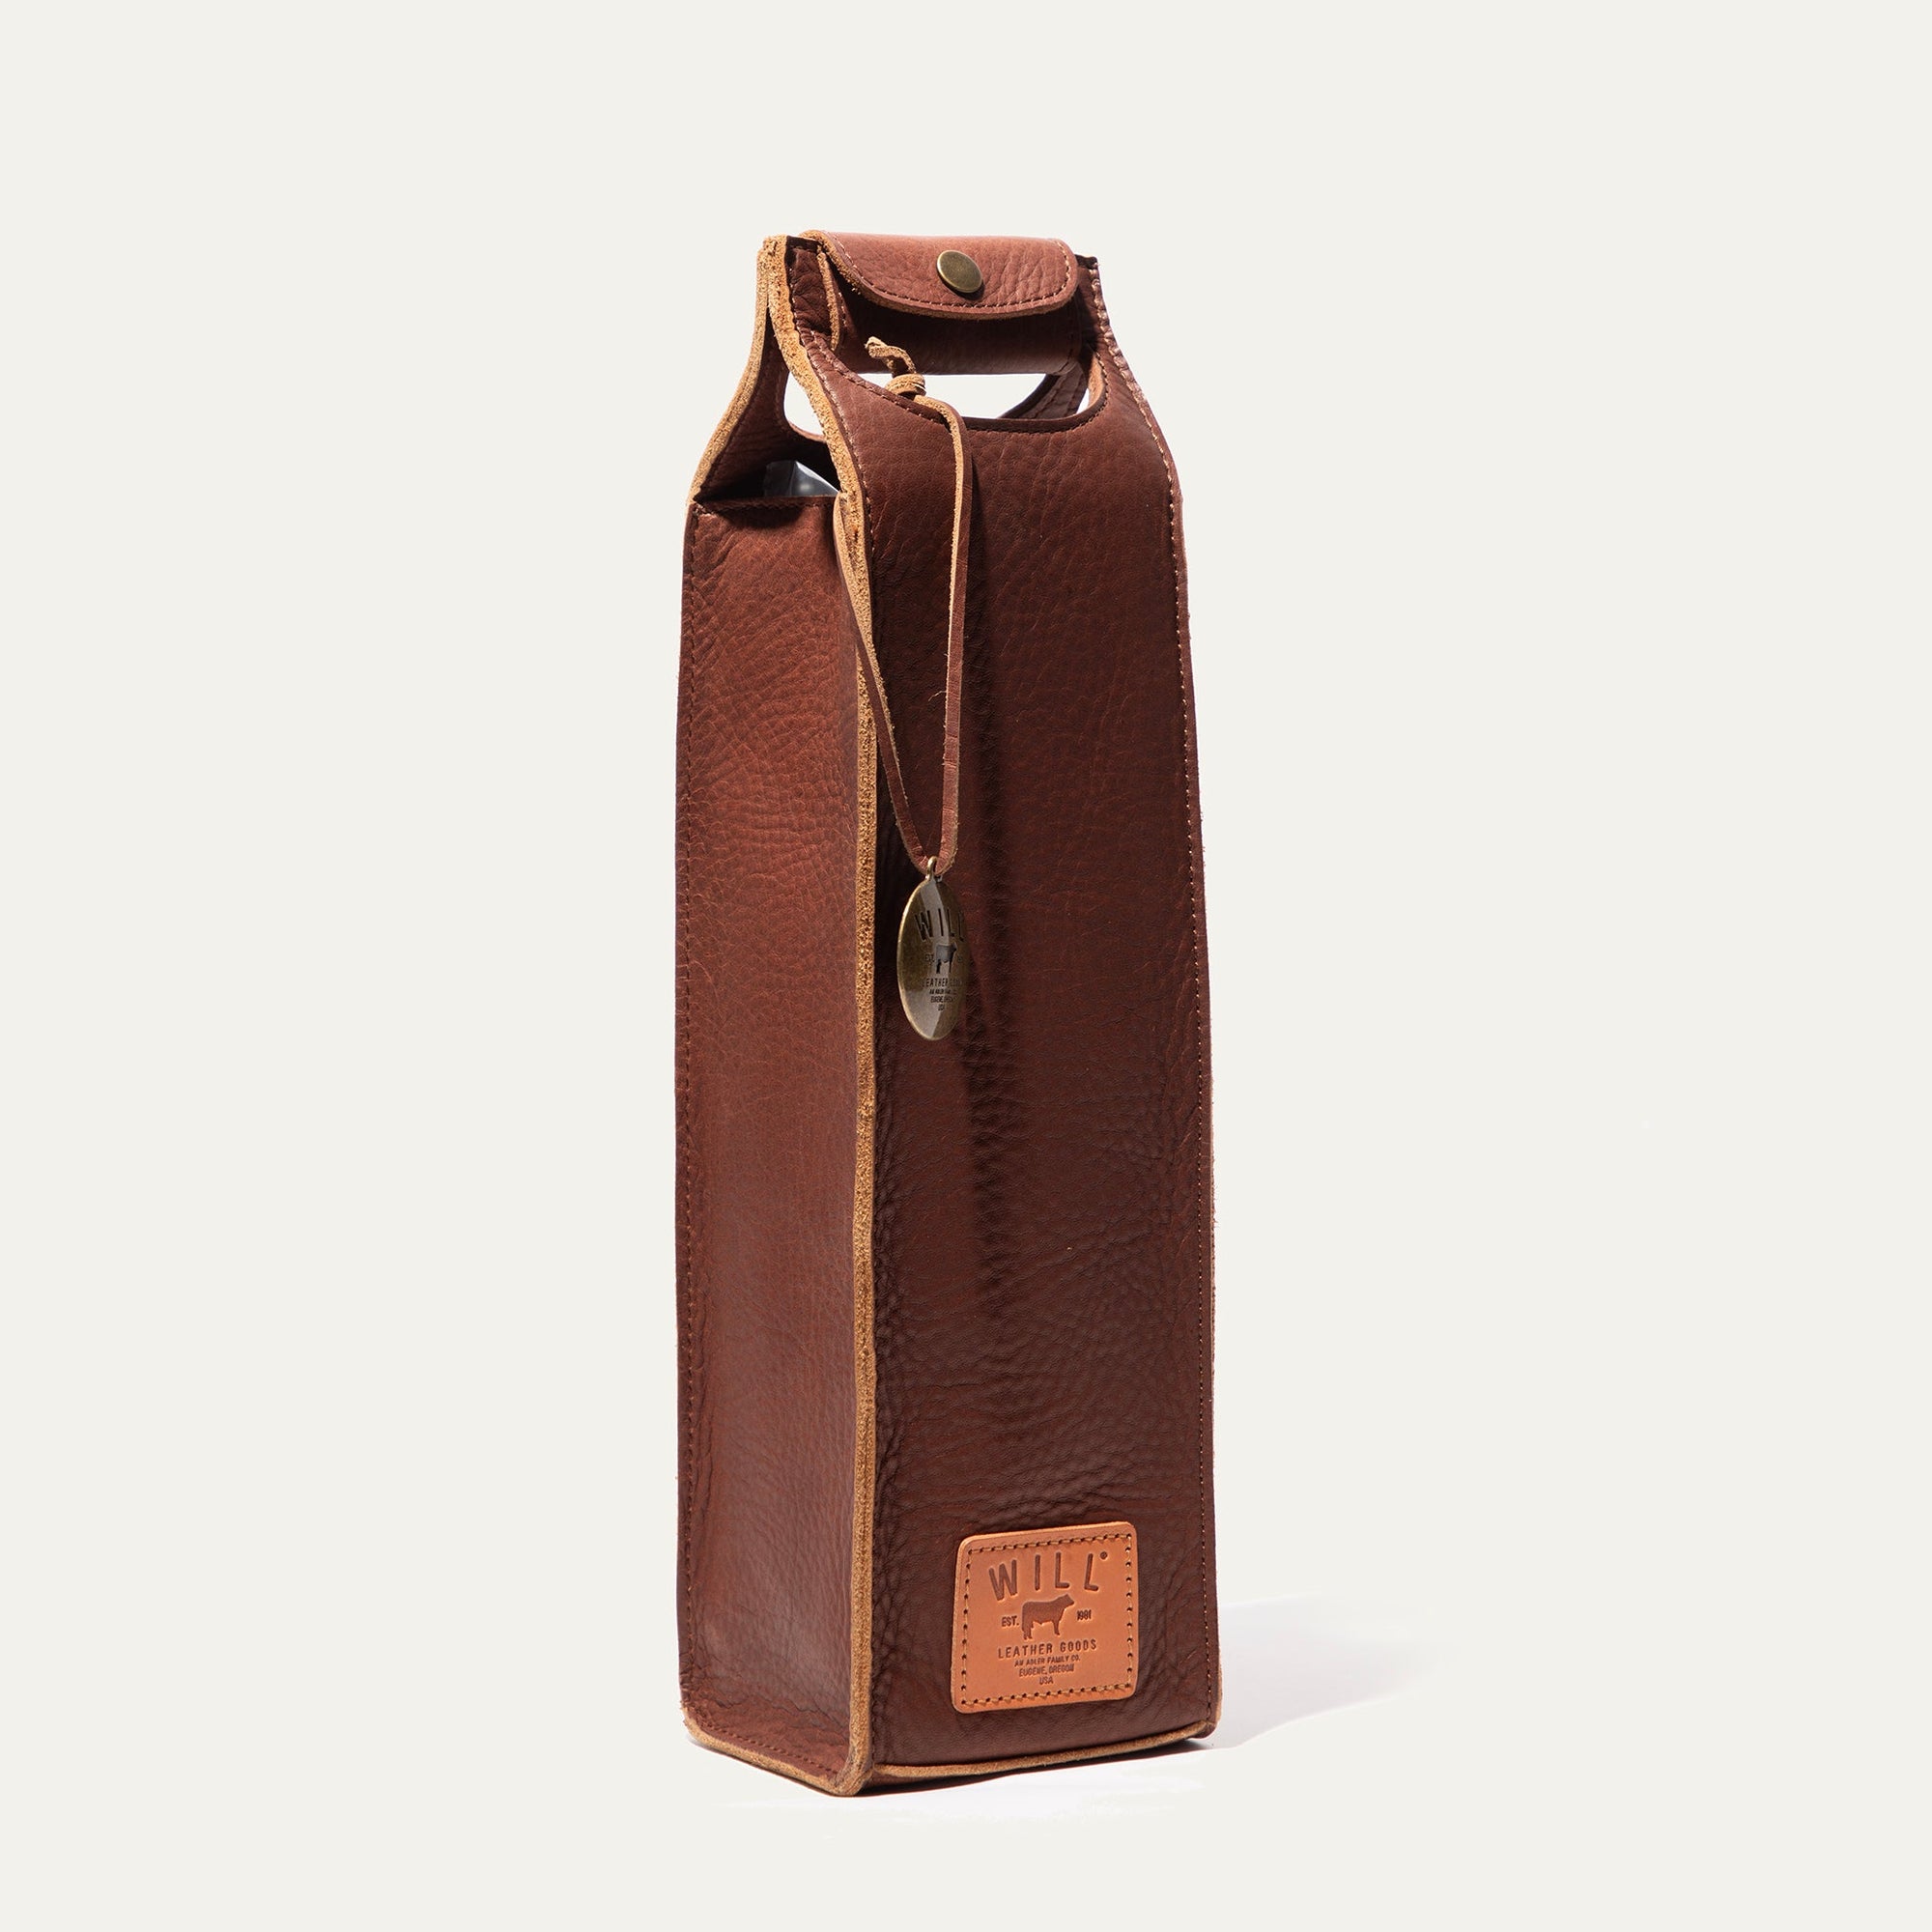 Leather Wine Bottle Case in Brown by Will Leather Goods